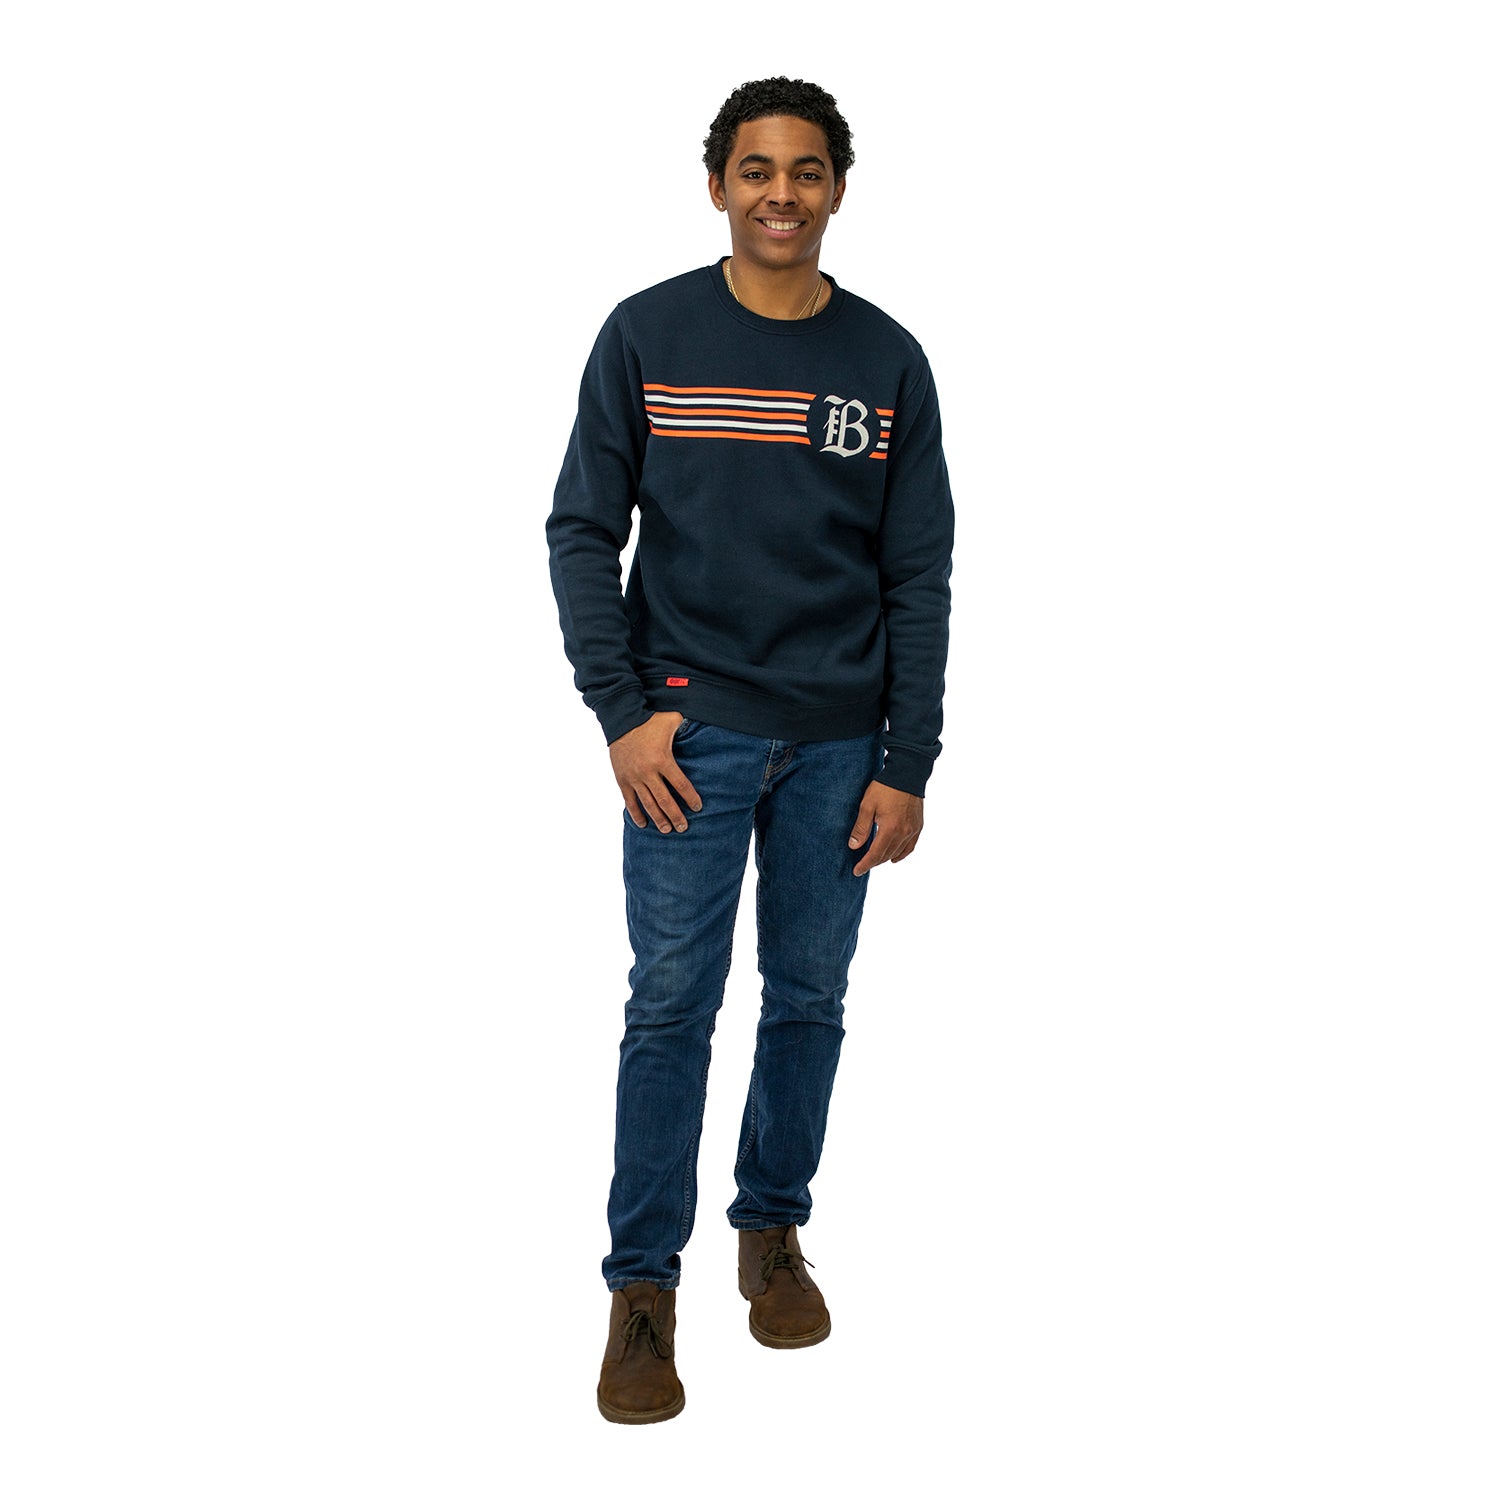 Unisex Official Bay FC Striped Navy Crewneck - On Model Full Body Front View